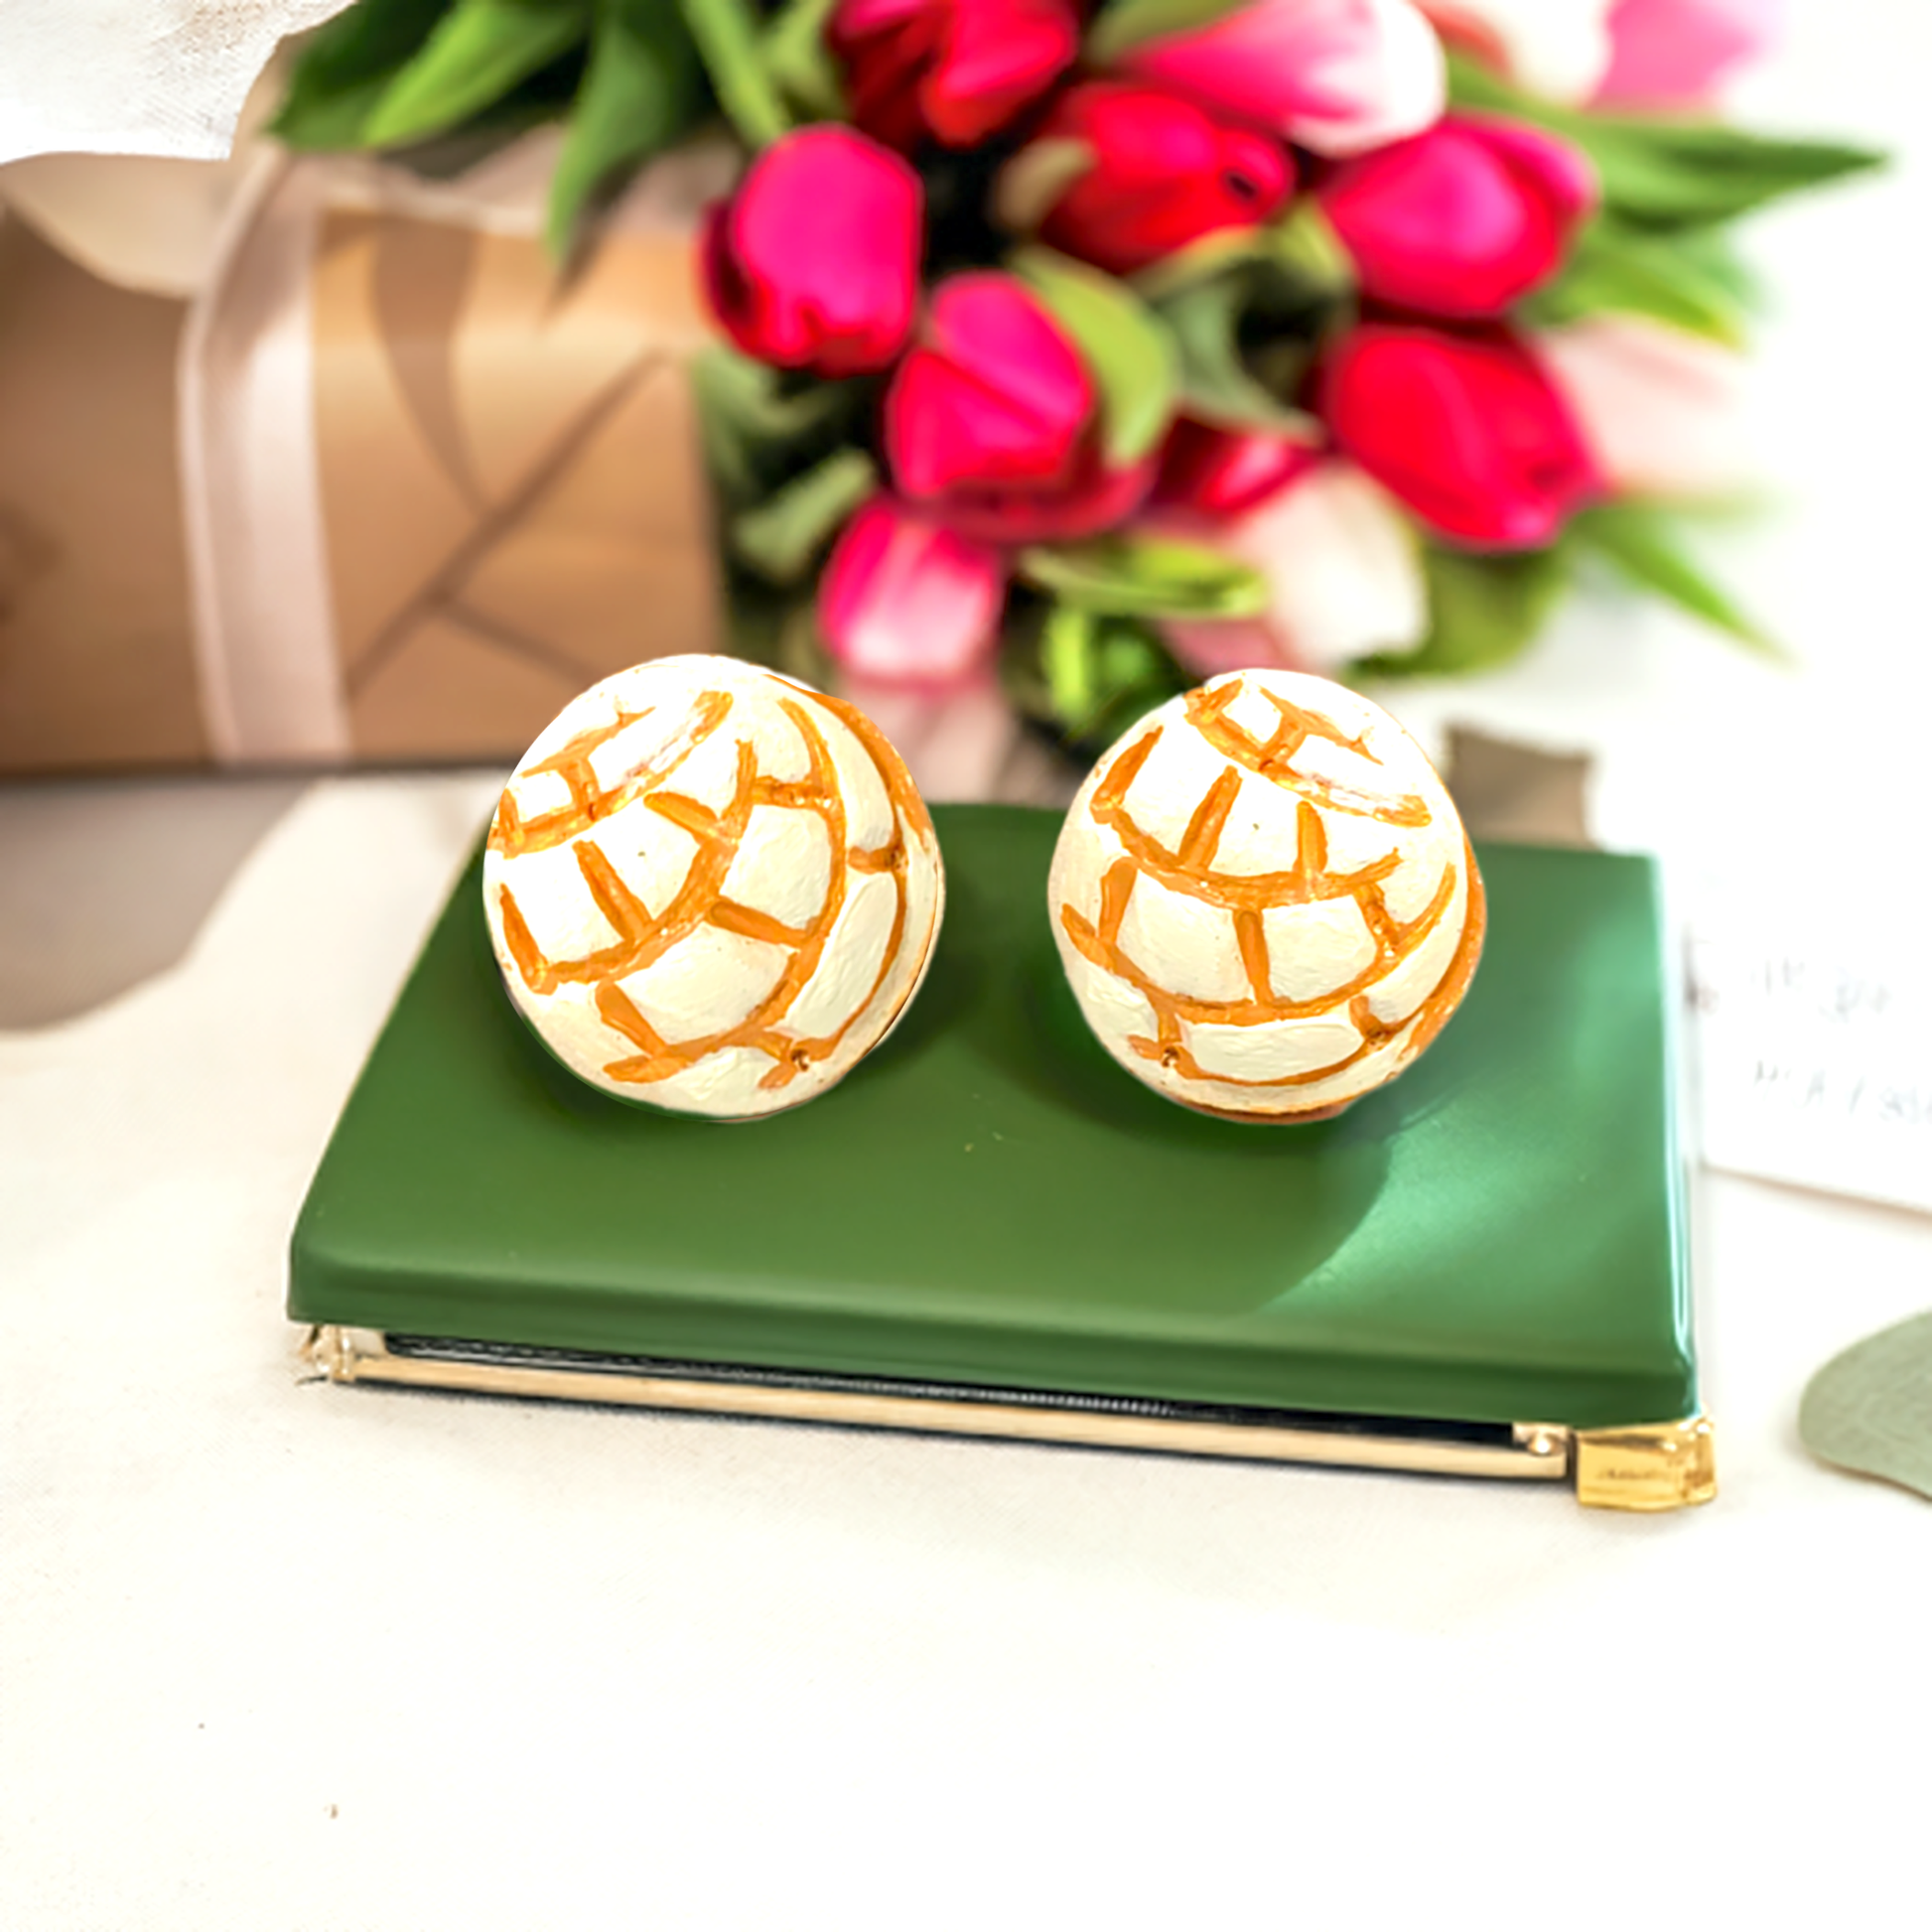 Clay concha earrings. Mexican sweet bread concha earrings. Mexico pan dulce mini stud conchitas earrings for girls. Hand painted, handmade, Mexican earrings. Mexcian clay jewelry earrings.